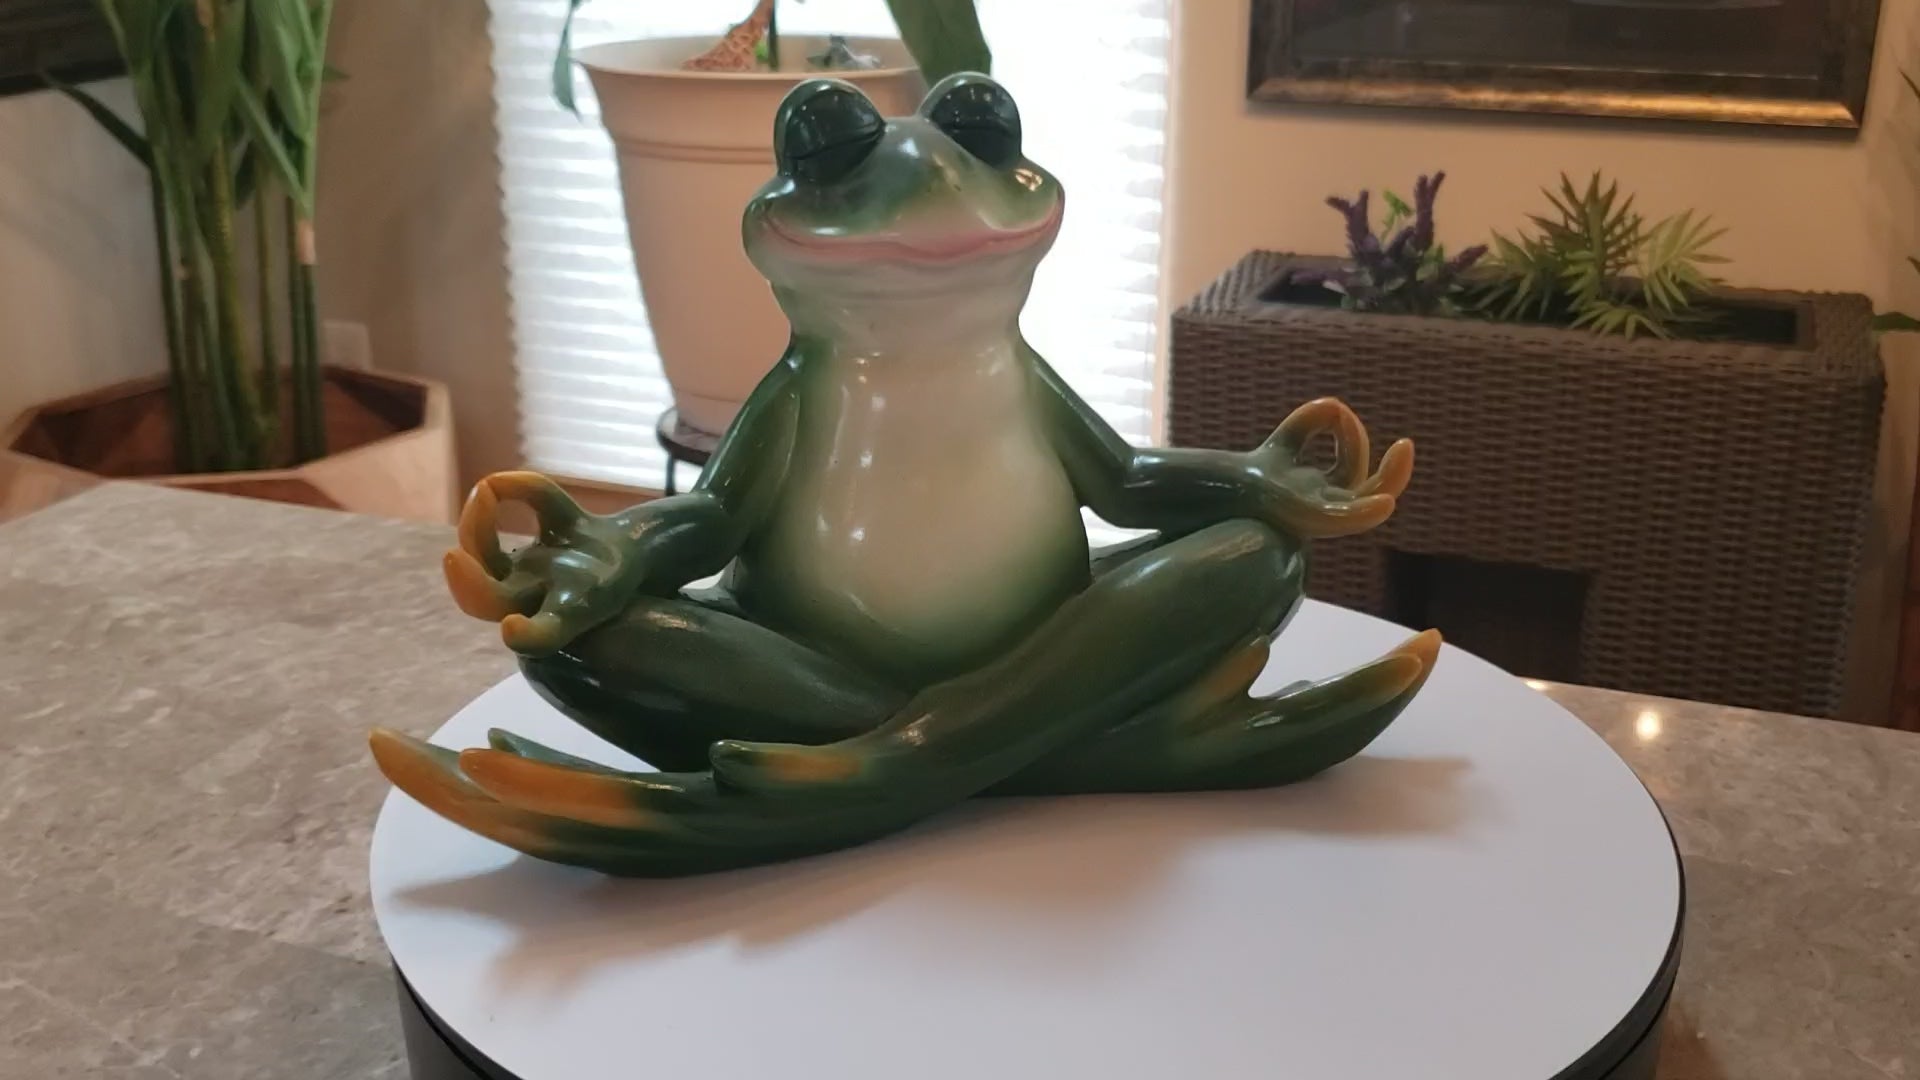 Auction for sale yoga frog statue